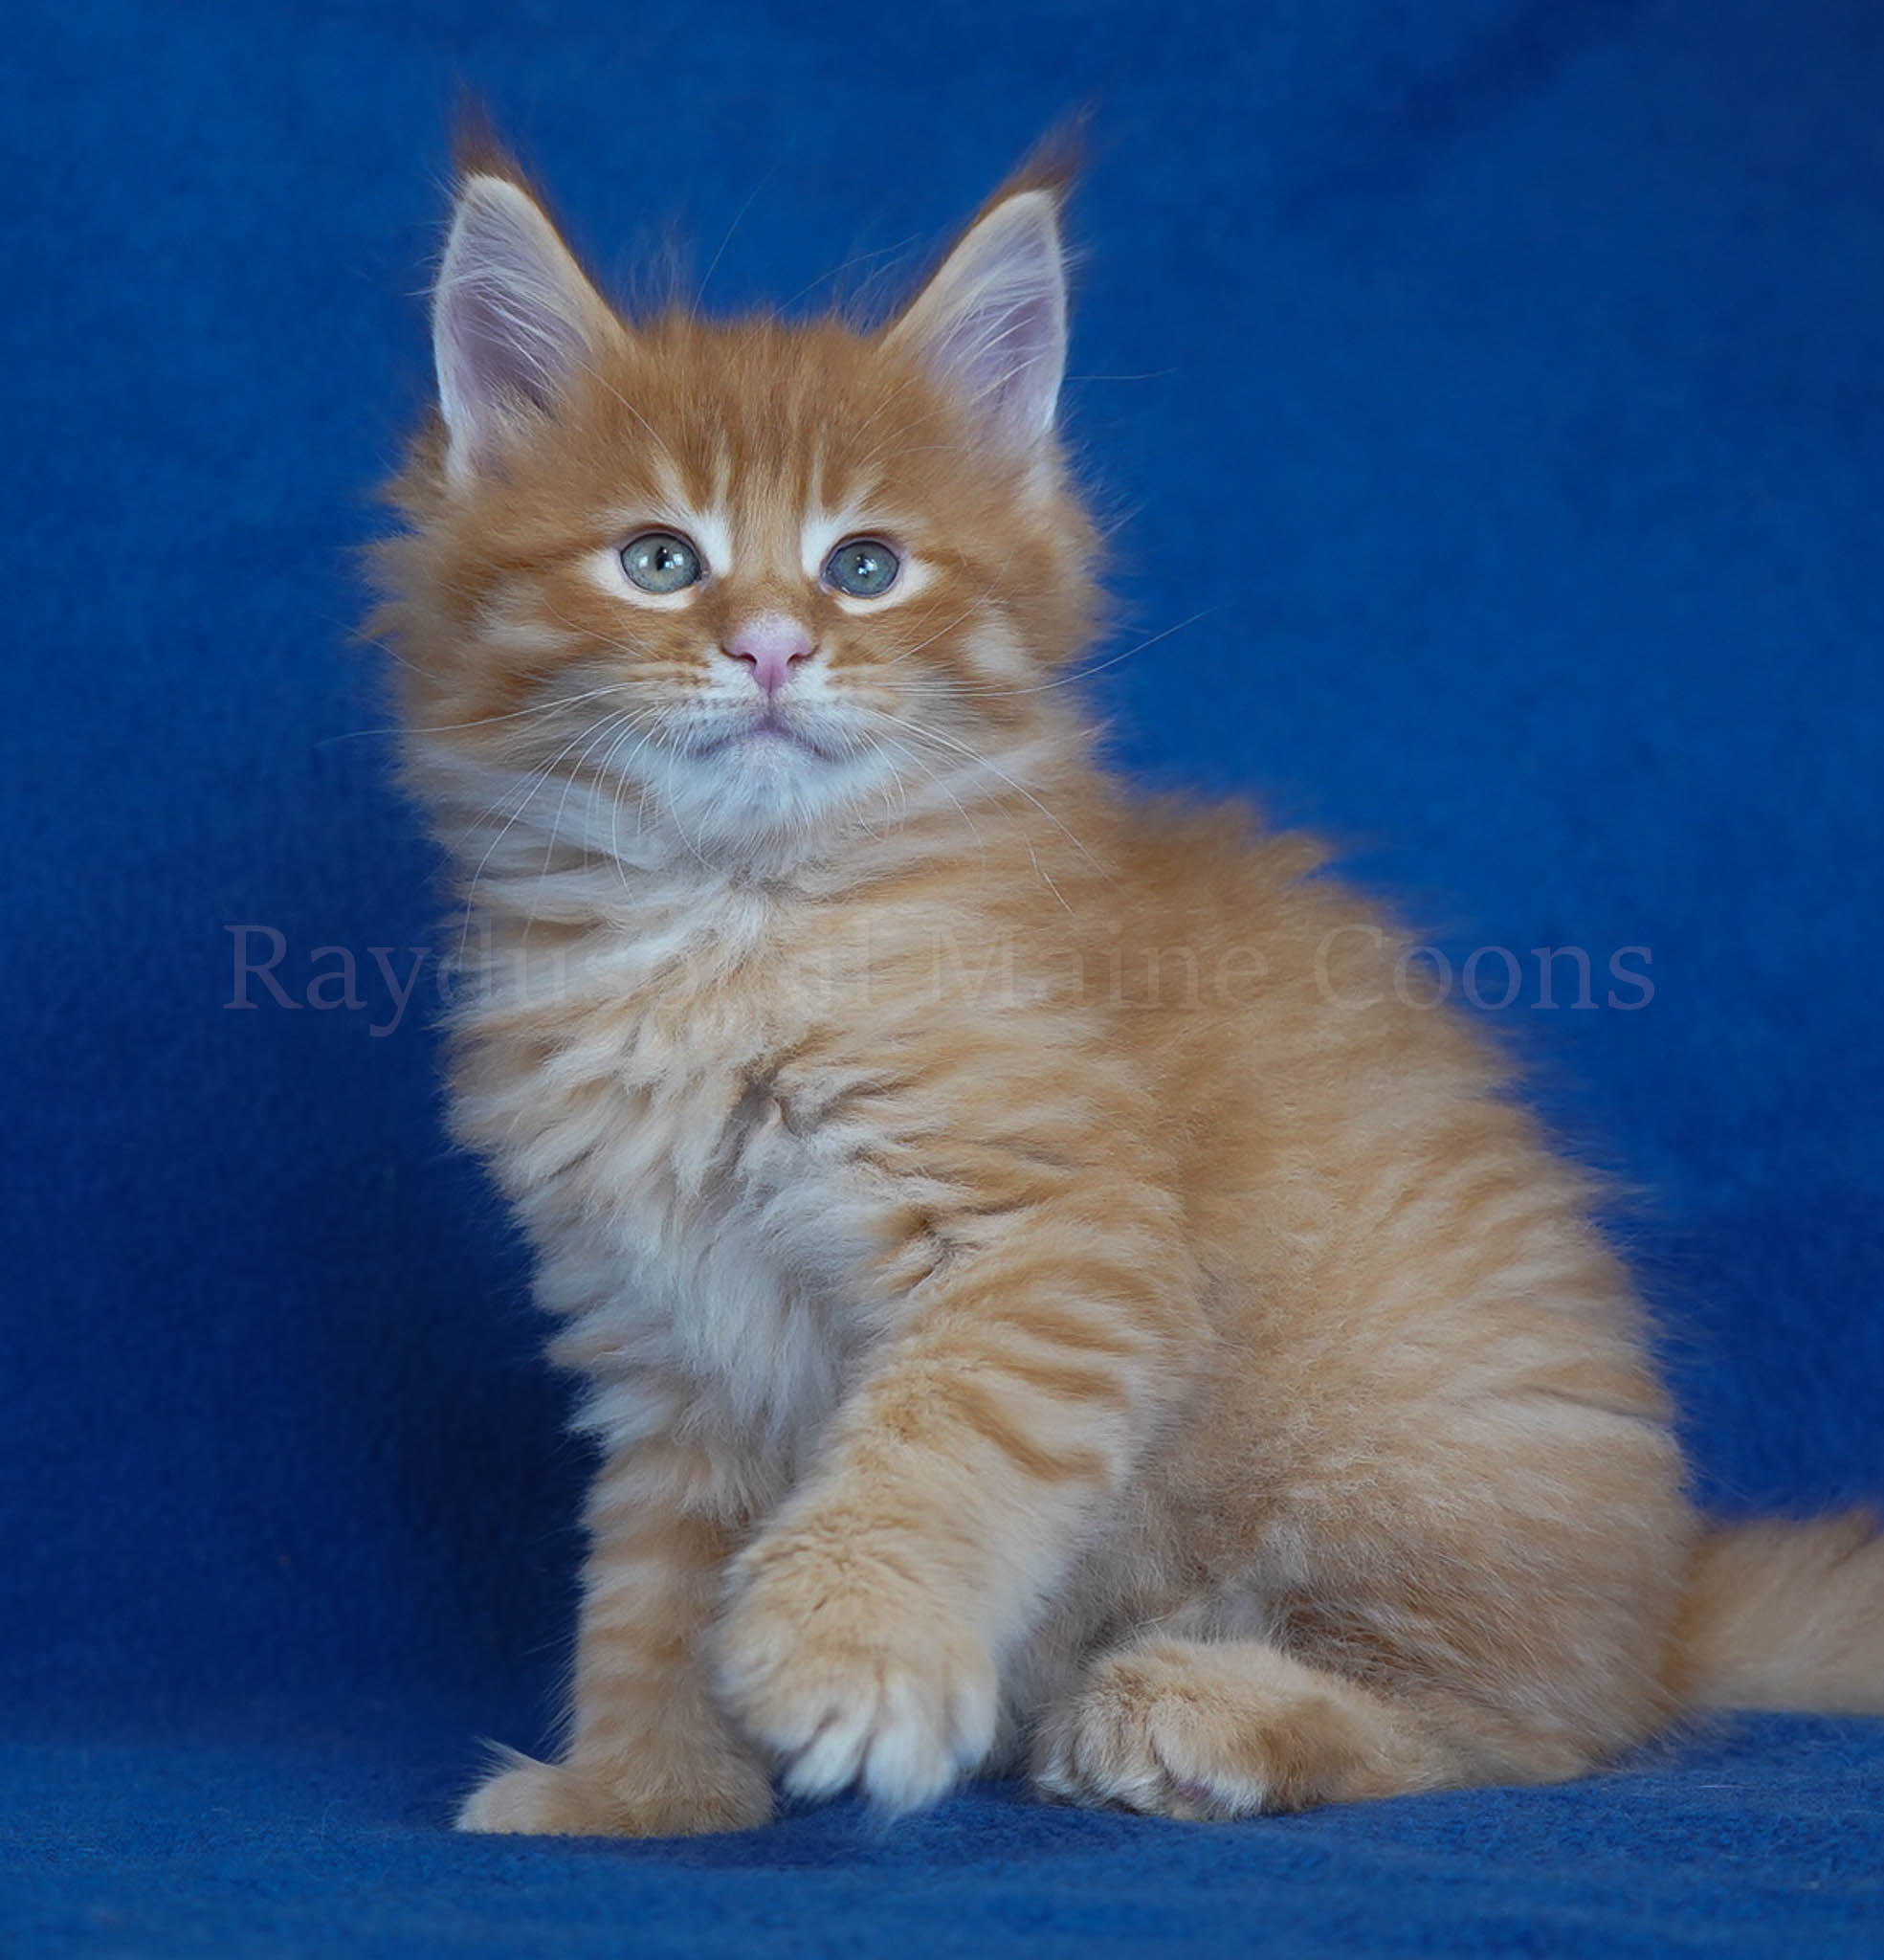 Jaloni 7 weeks old RESERVED for Katie and family from Mount Prospect, IL